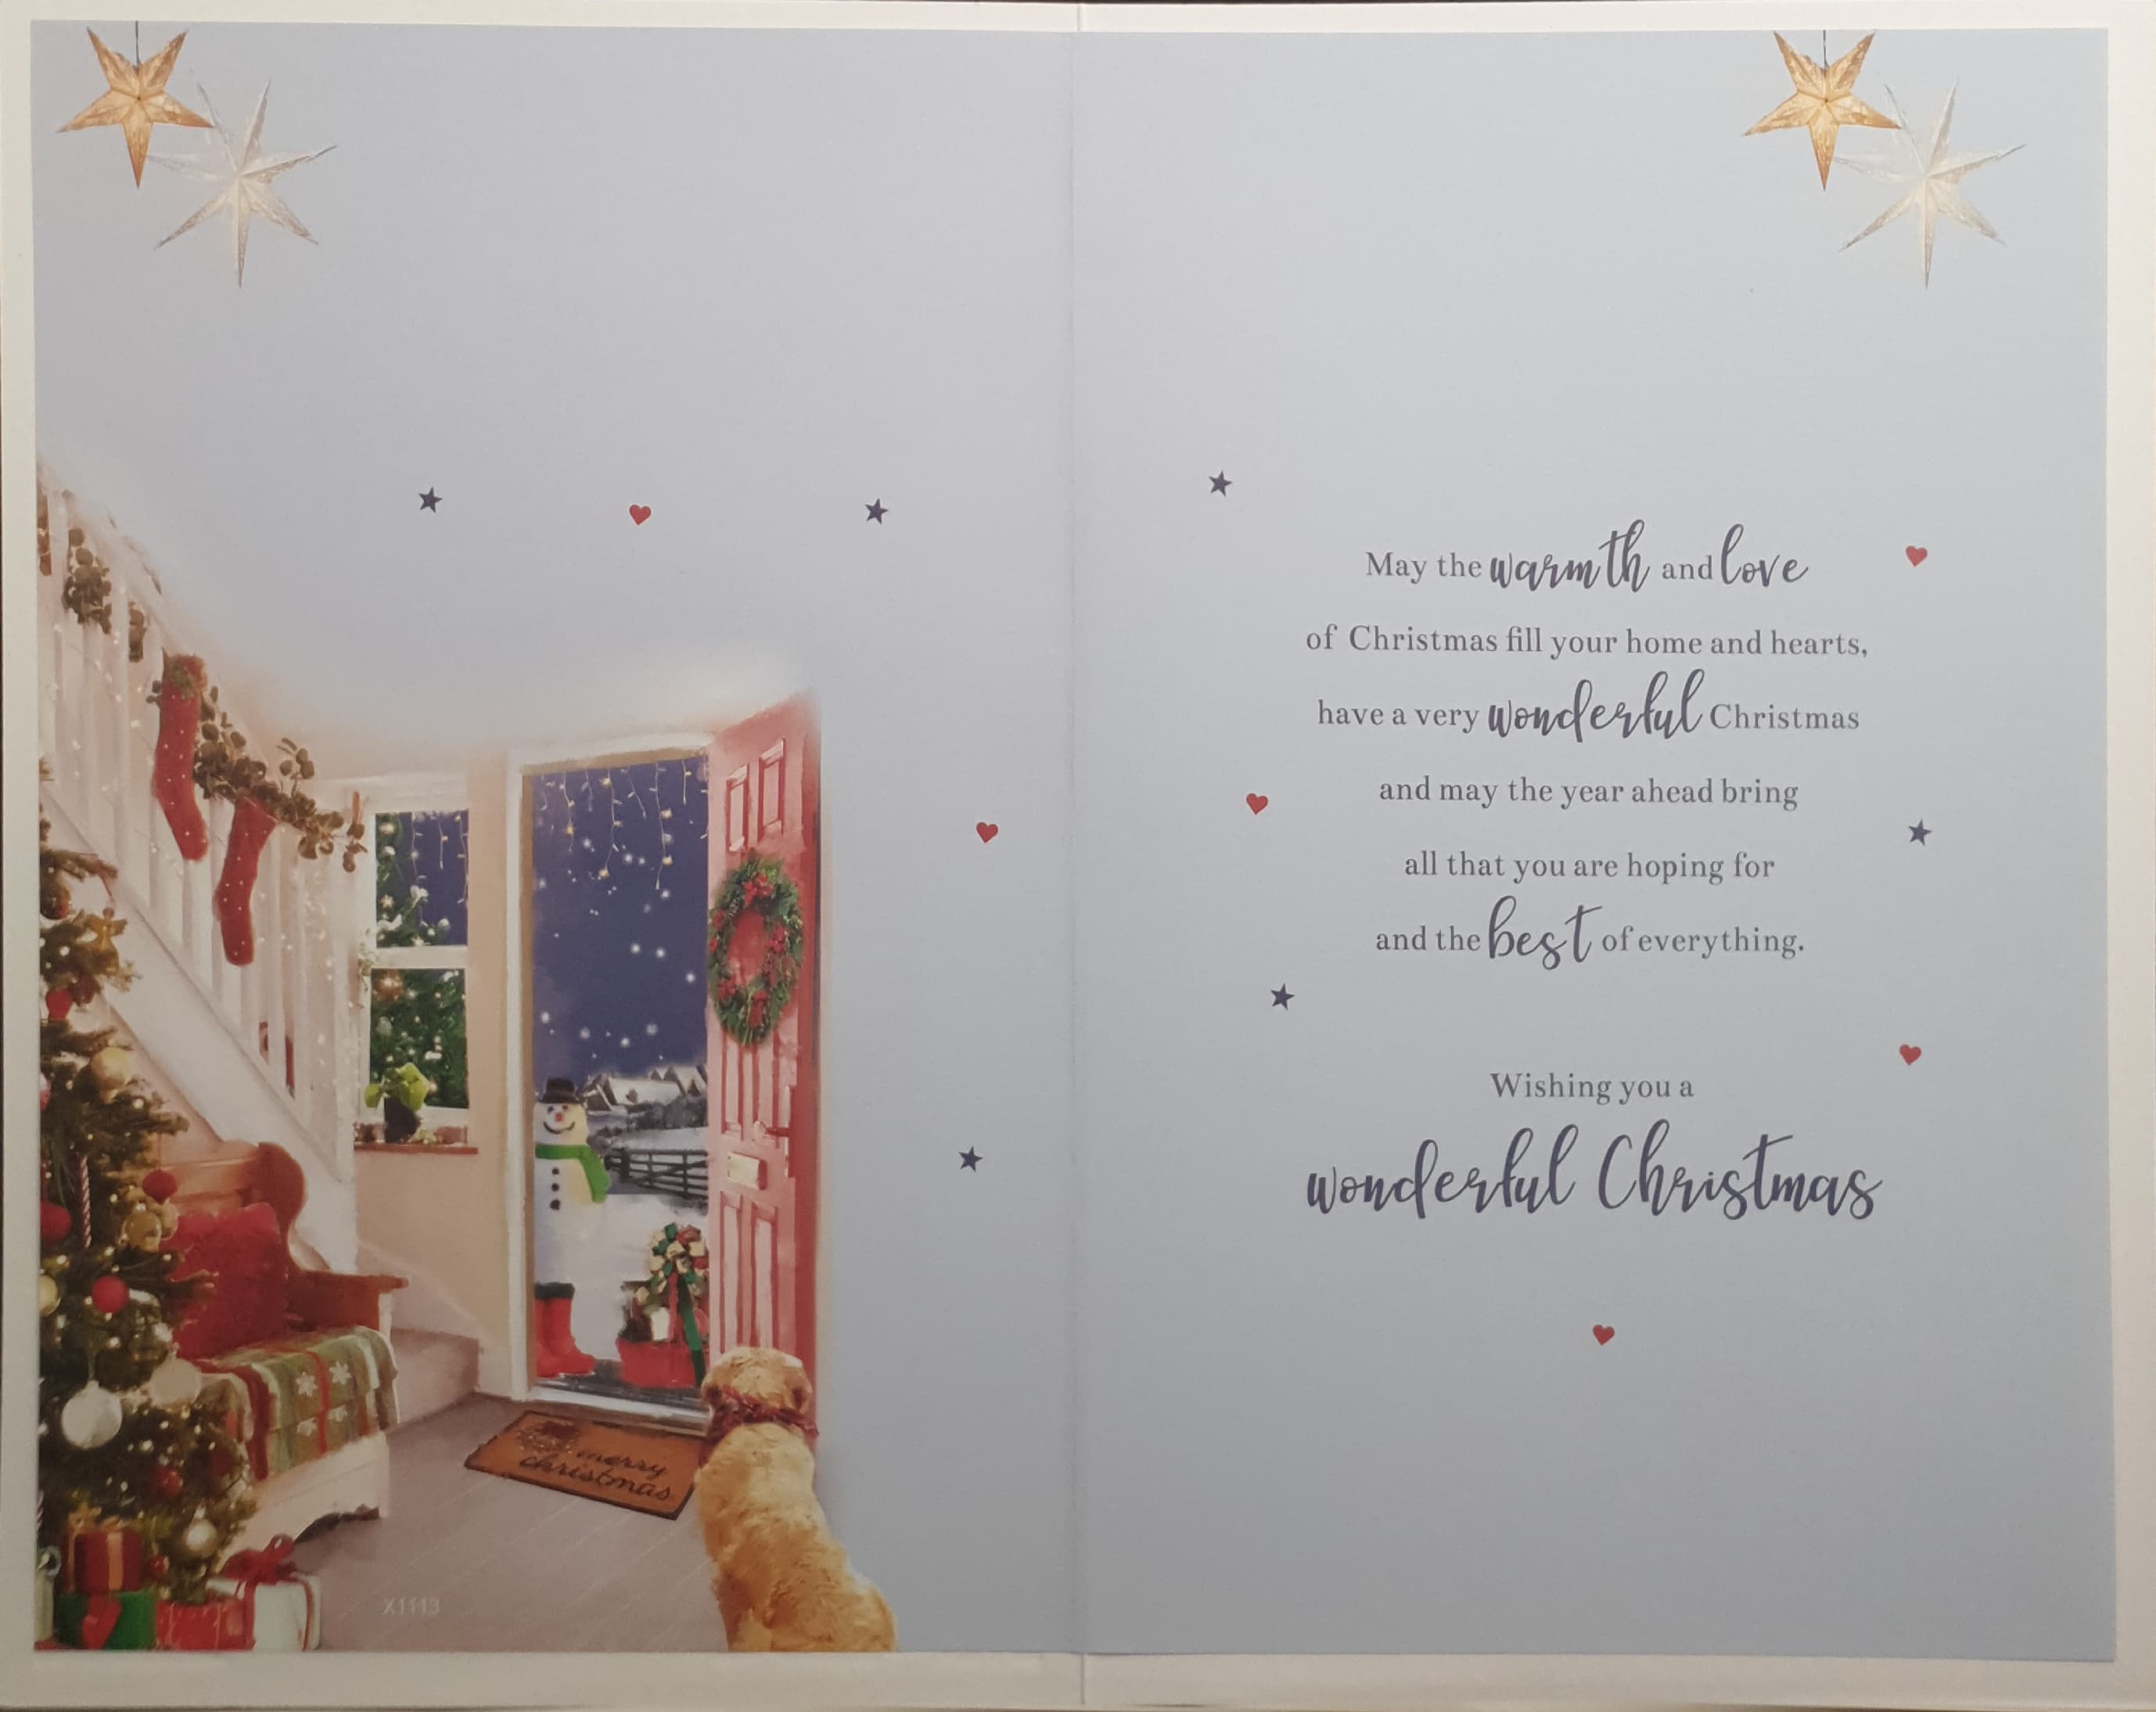 Son & Daughter-in-Law Christmas Card - Golden Retriever & Decorated Hallway